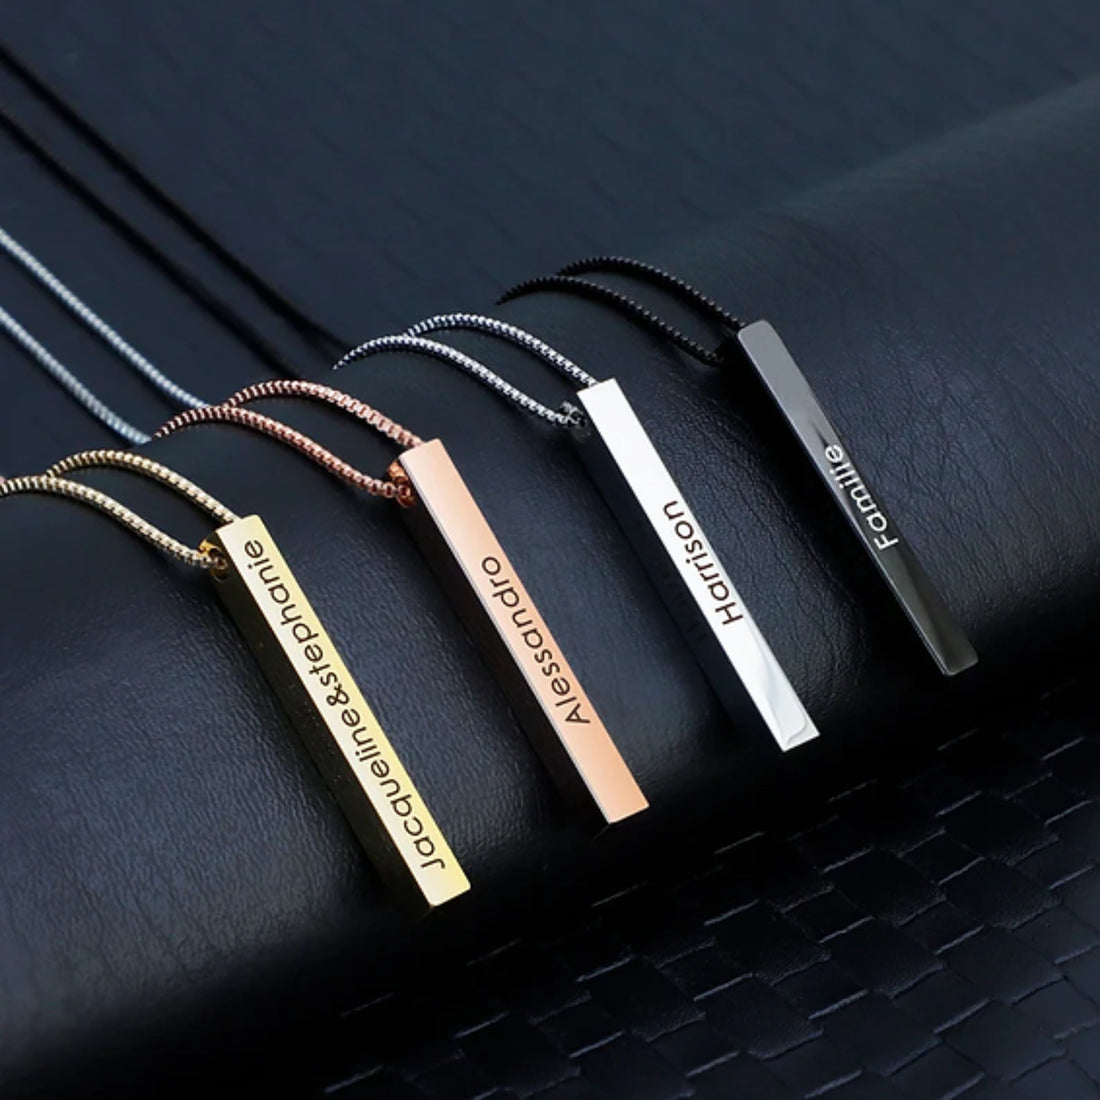 Unique and Personalised: The Personalised Bar Pendant is a unique and personalised piece of jewellery that is perfect for those looking for a timeless and sophisticated accessory | Zestpics